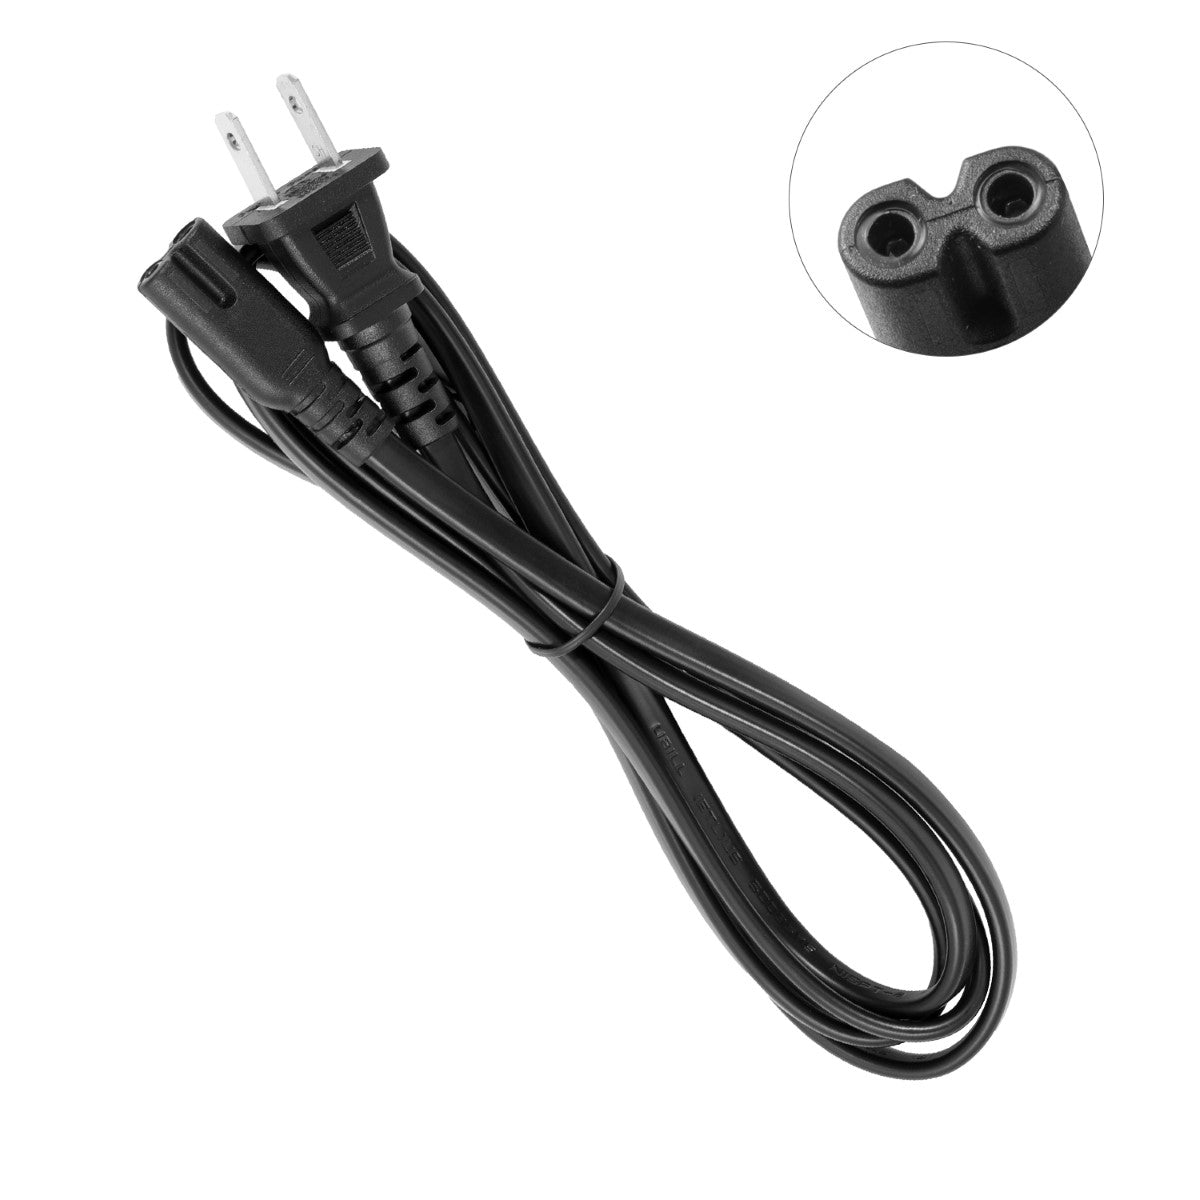 Power Cord for HP ENVY 5664 e-All-in-One Printer.